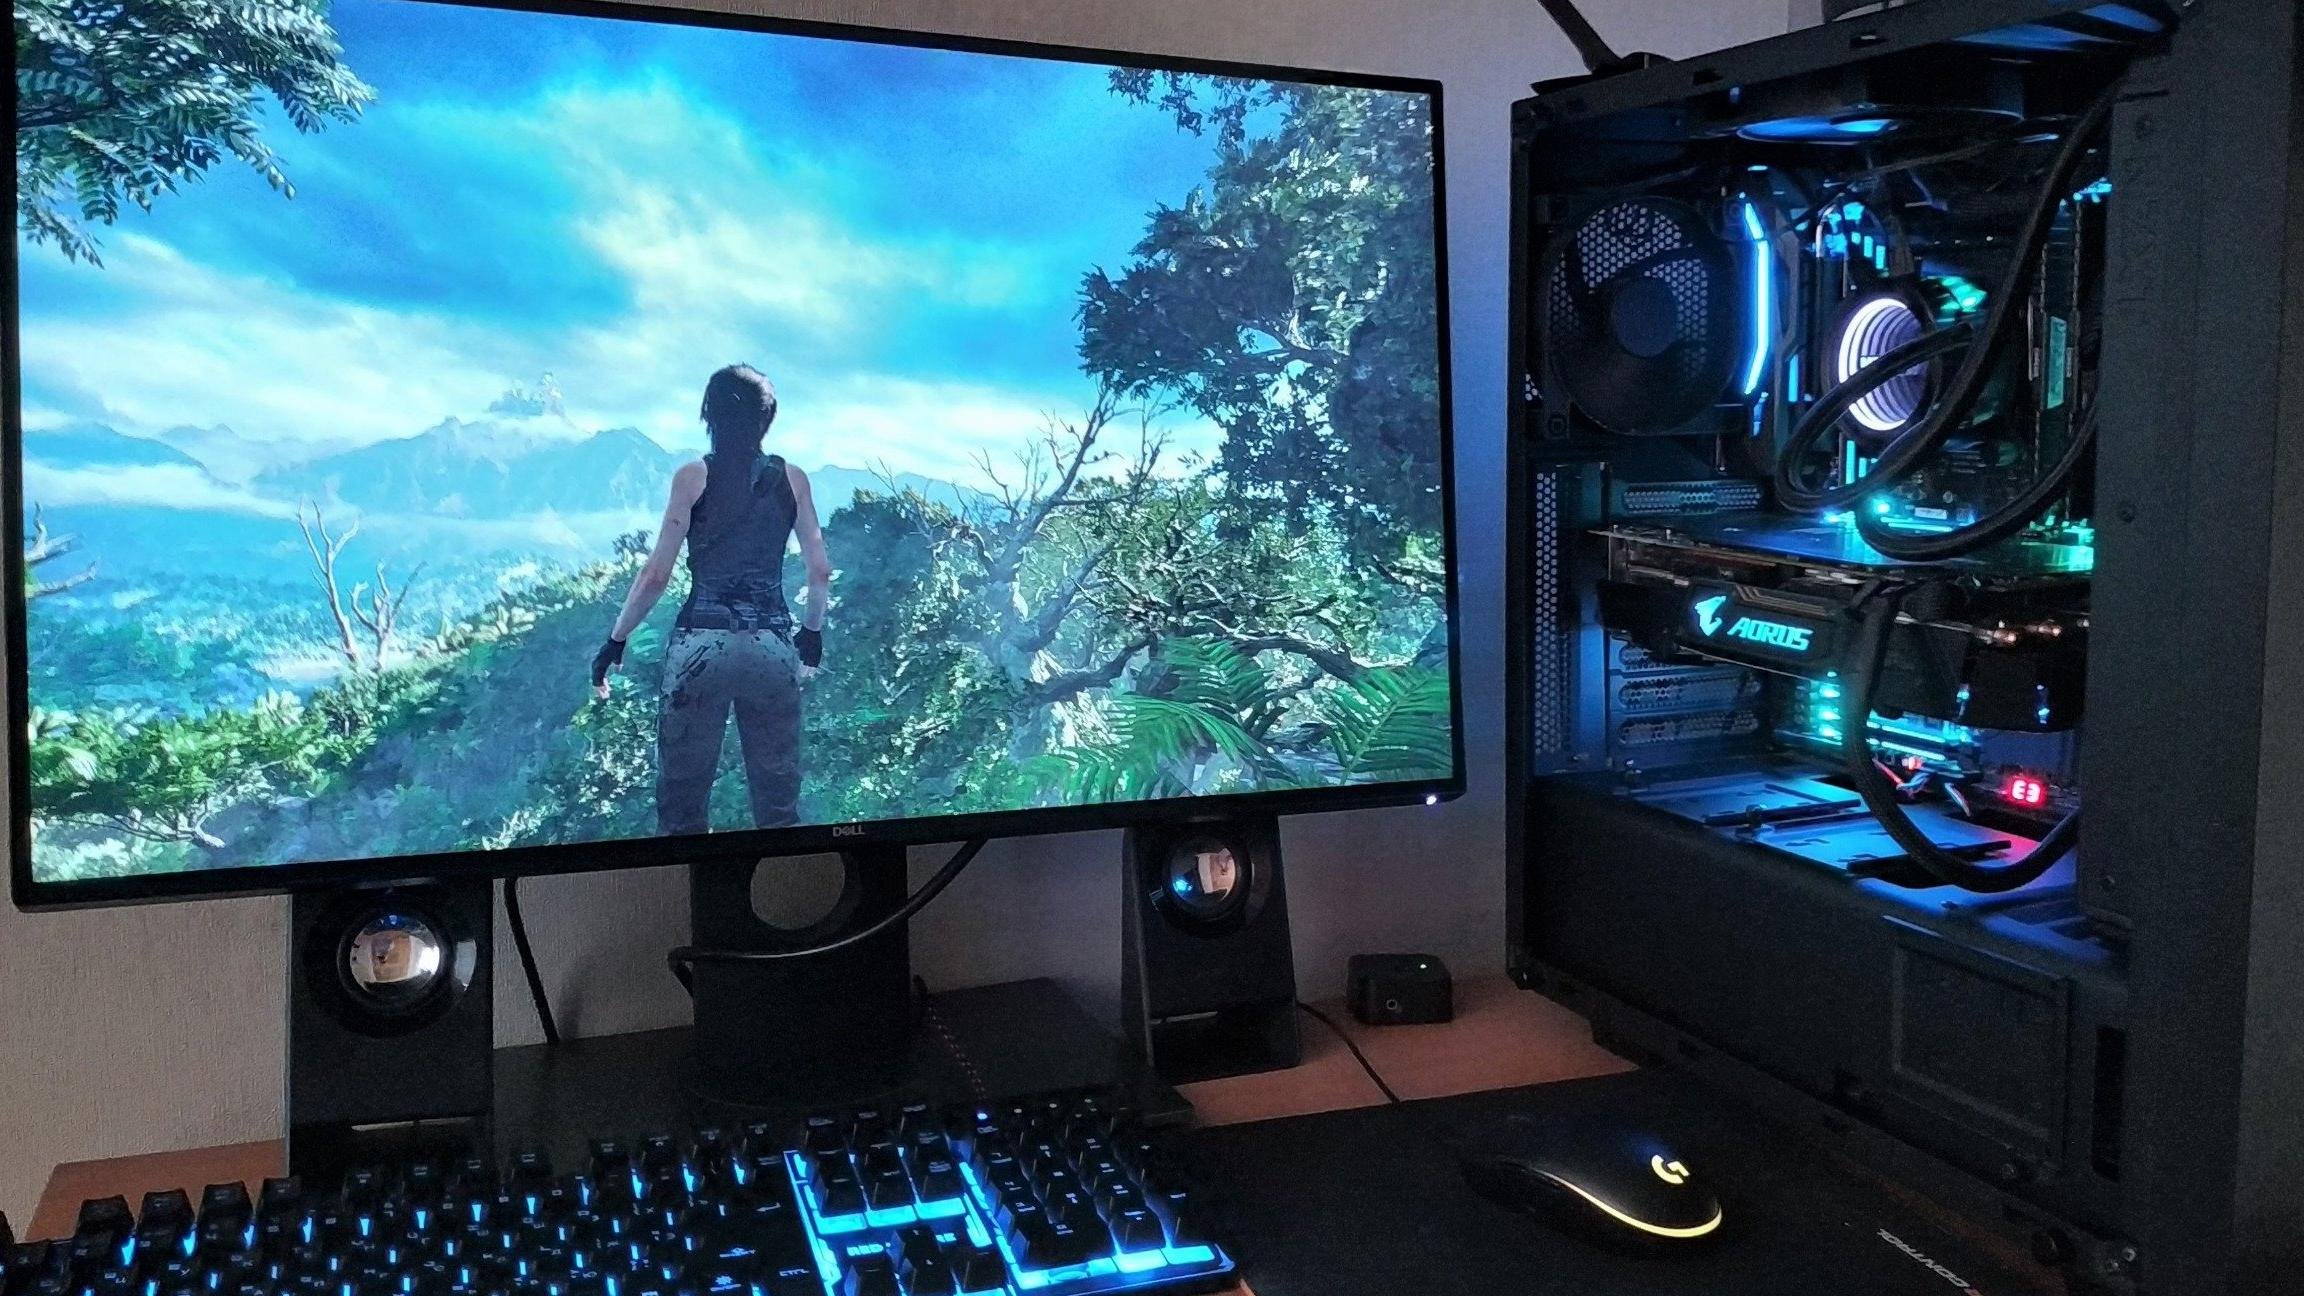 Buying or Assembling a Gaming PC: Which is More Profitable?